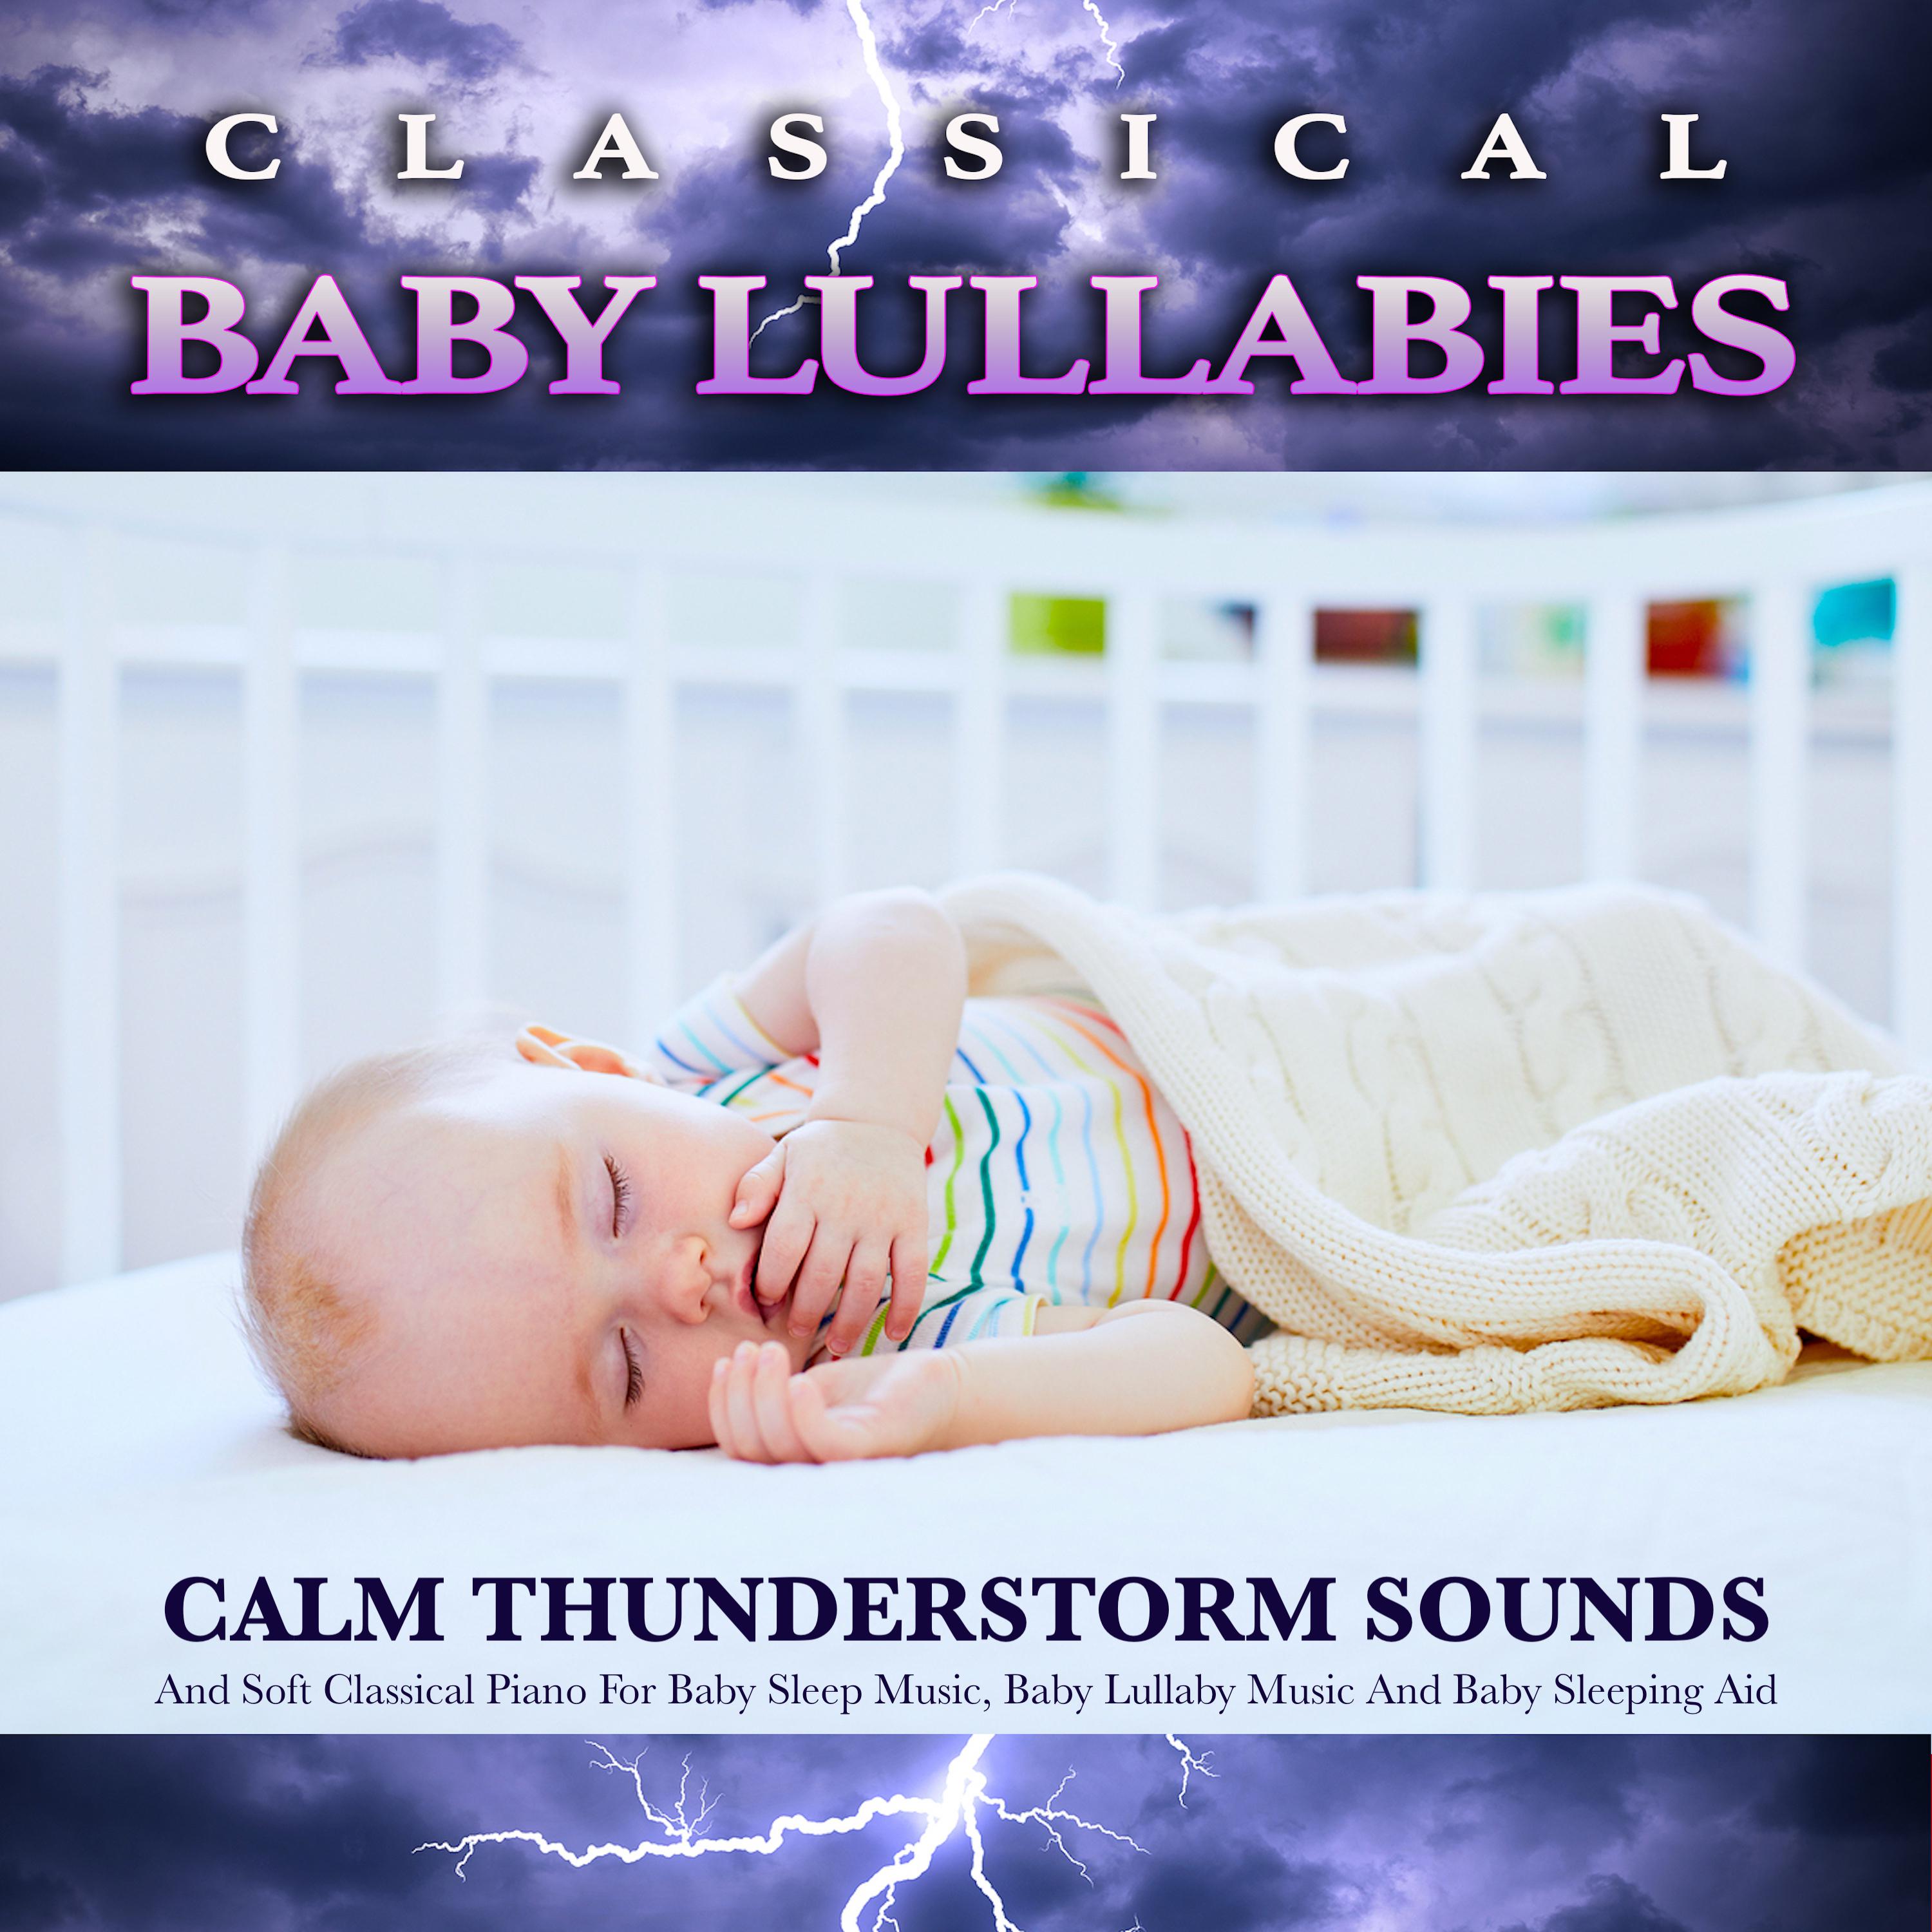 Piano Sonata - Mozart - Baby Lullaby - Baby Sleep Music - Classical Piano and Thunderstorm Sounds For Sleep